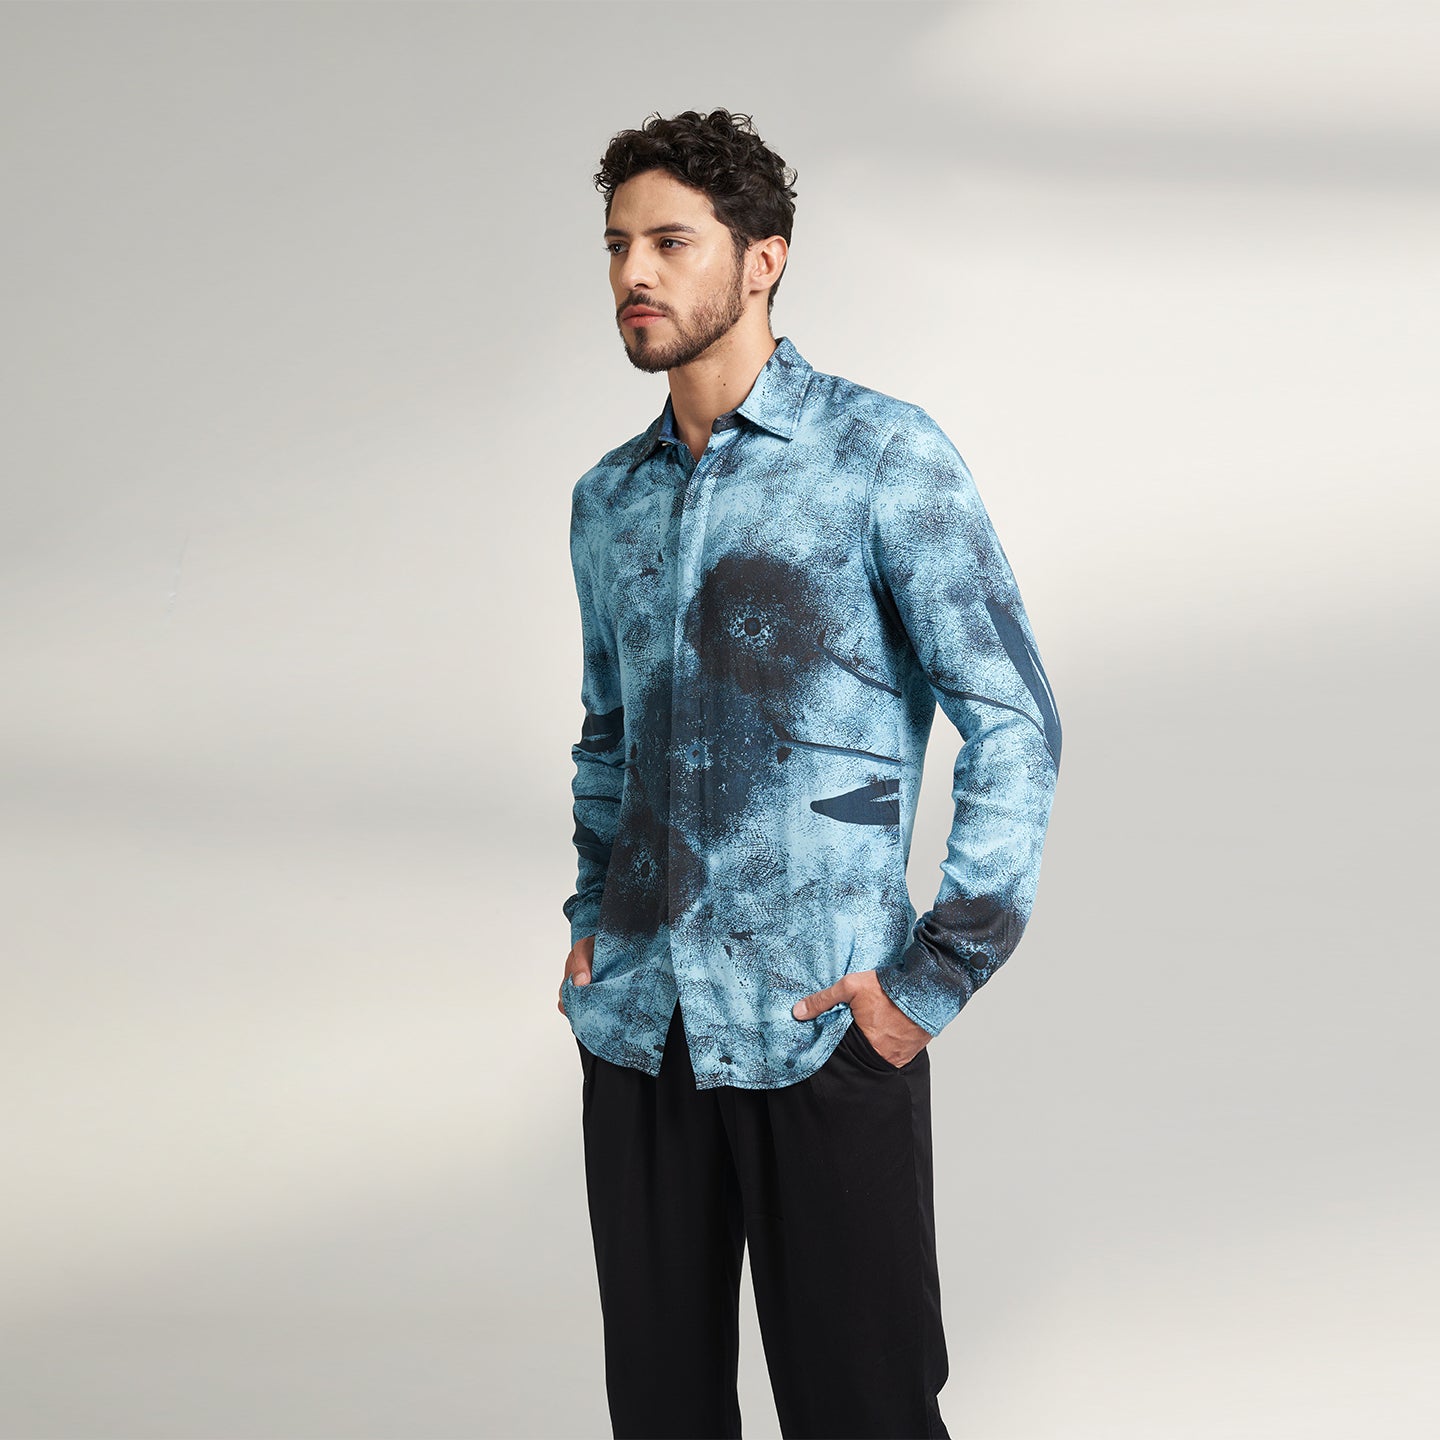 A BLUE AND BLACK PRINTED SHIRT MADE FROM ORGANIC LOTUS STEM FABRIC, PRINTED WITH NON TOXIC GOTS CERTIFIED PRINT. THIS SHIRT HAS A COMFORT FIT